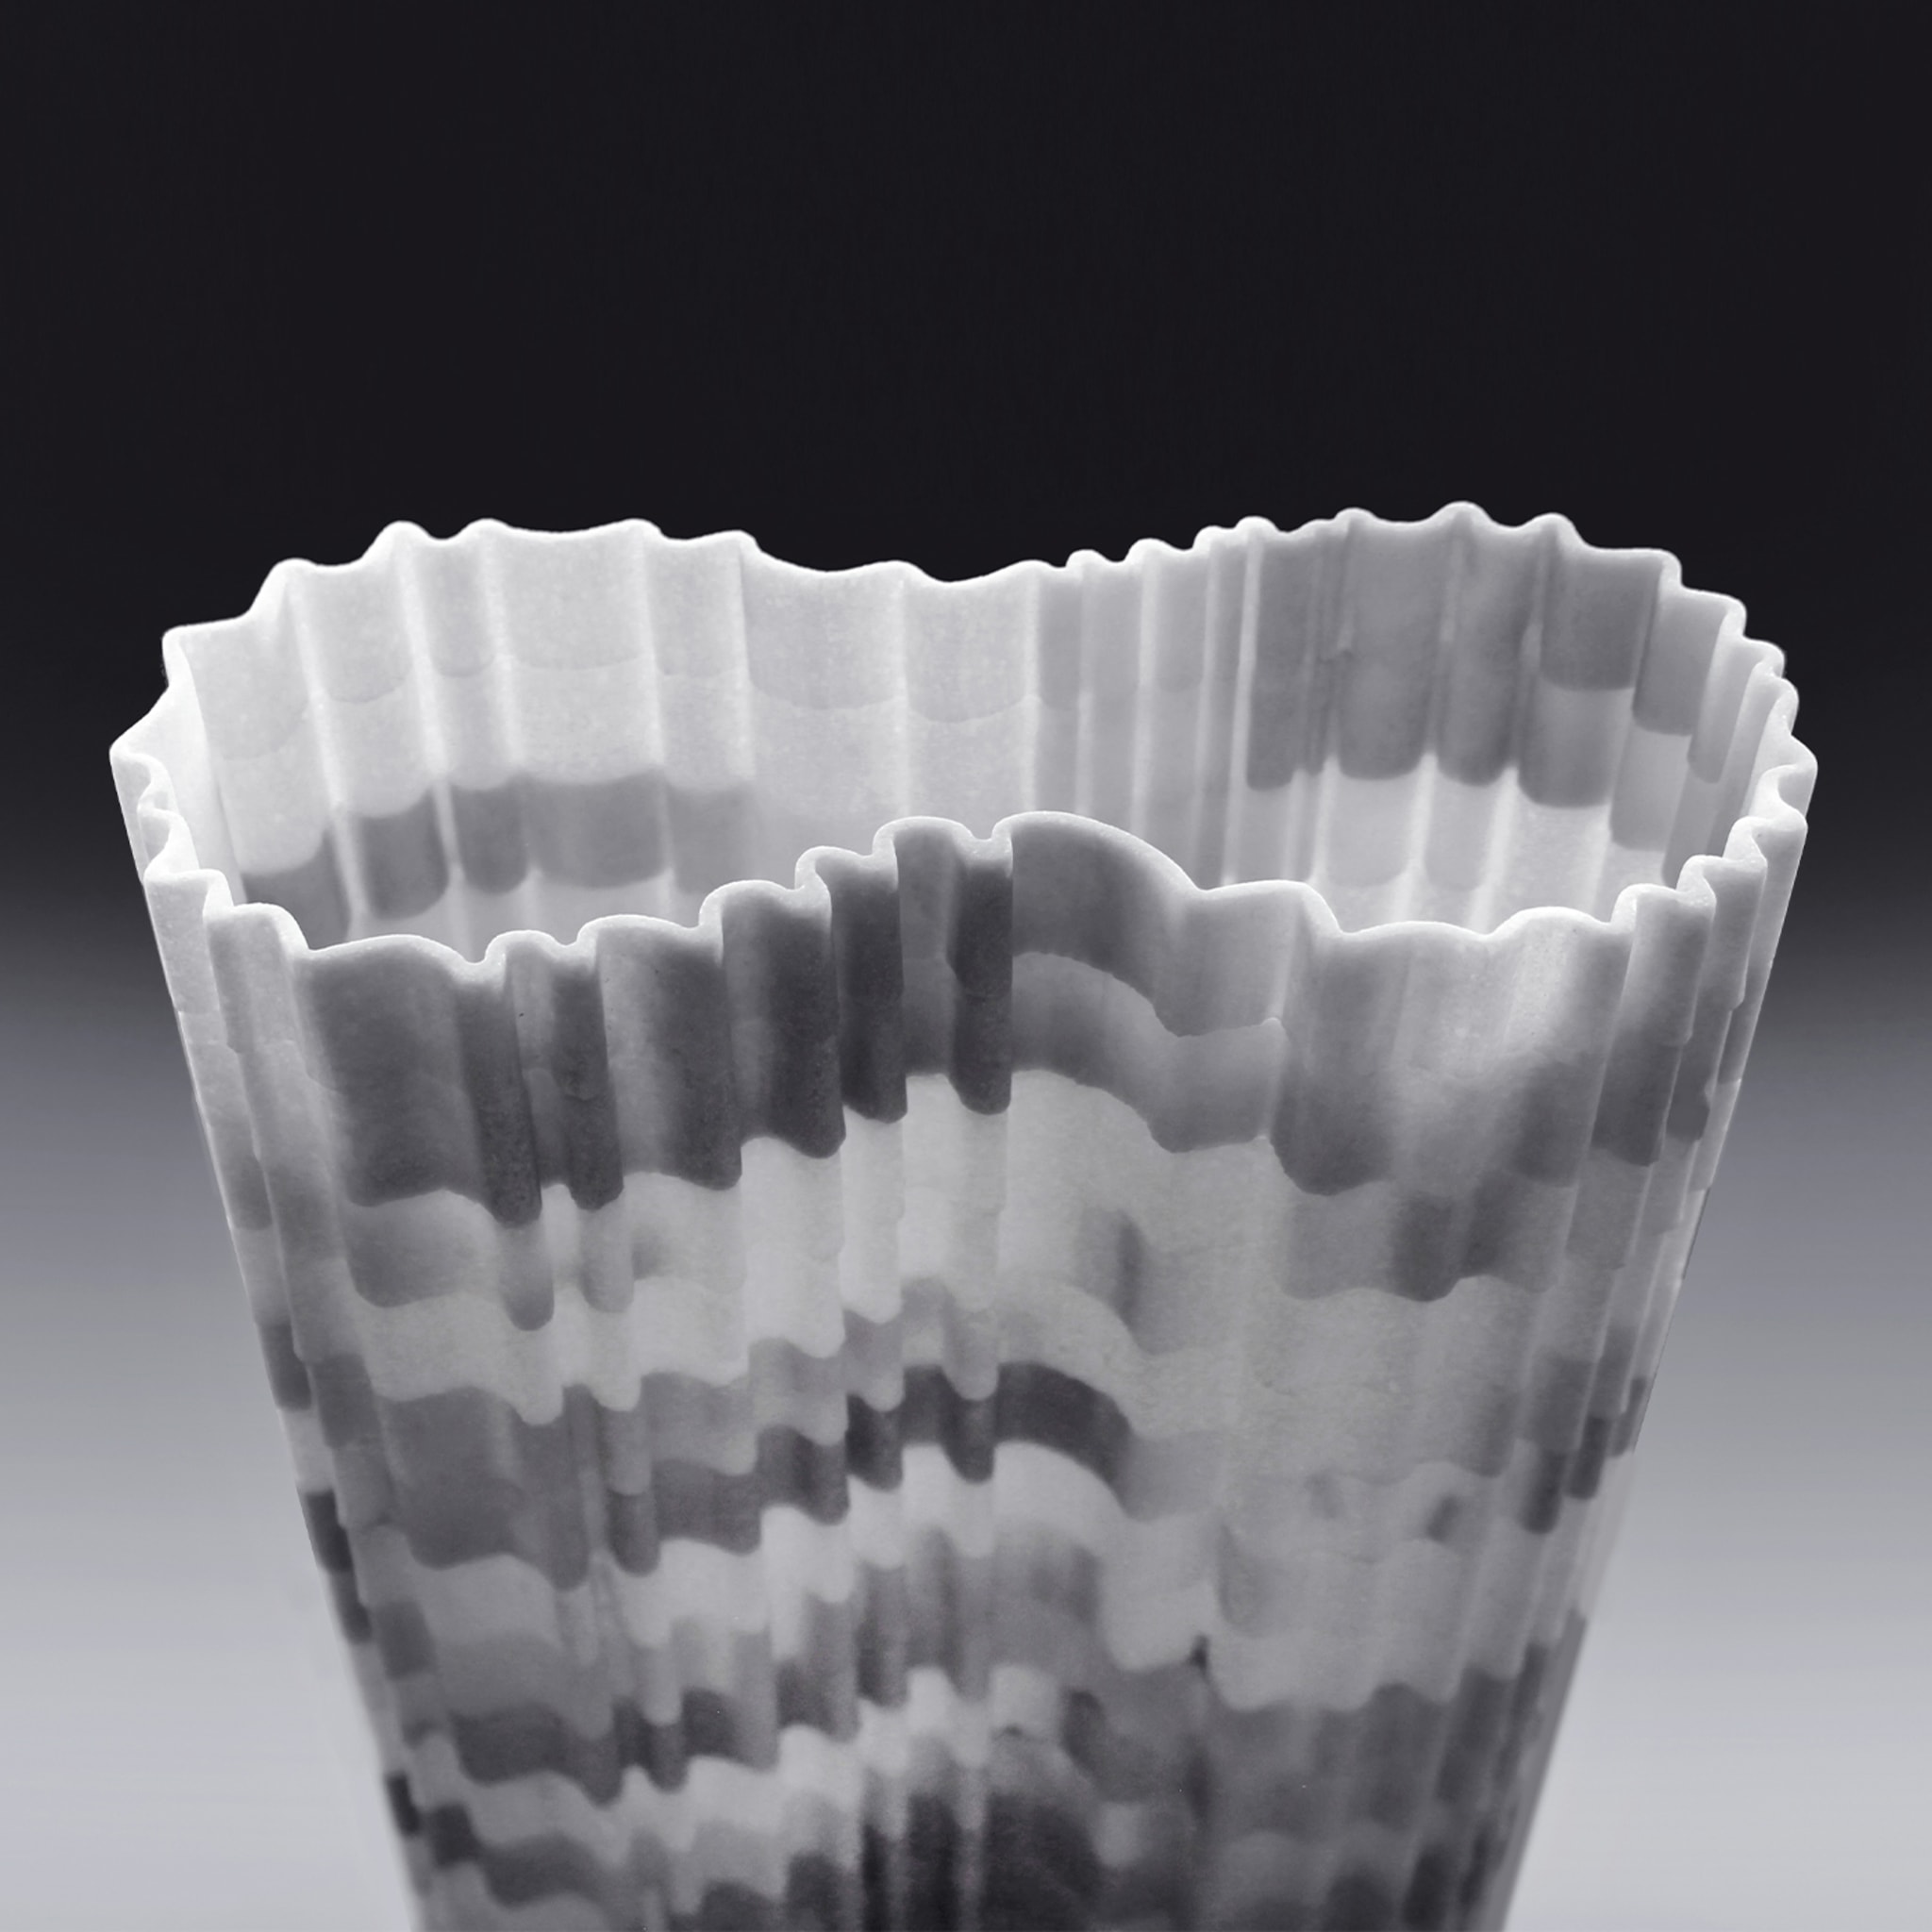 Stripes Vase Olimpic White Marble #1 by Paolo Ulian - Alternative view 4